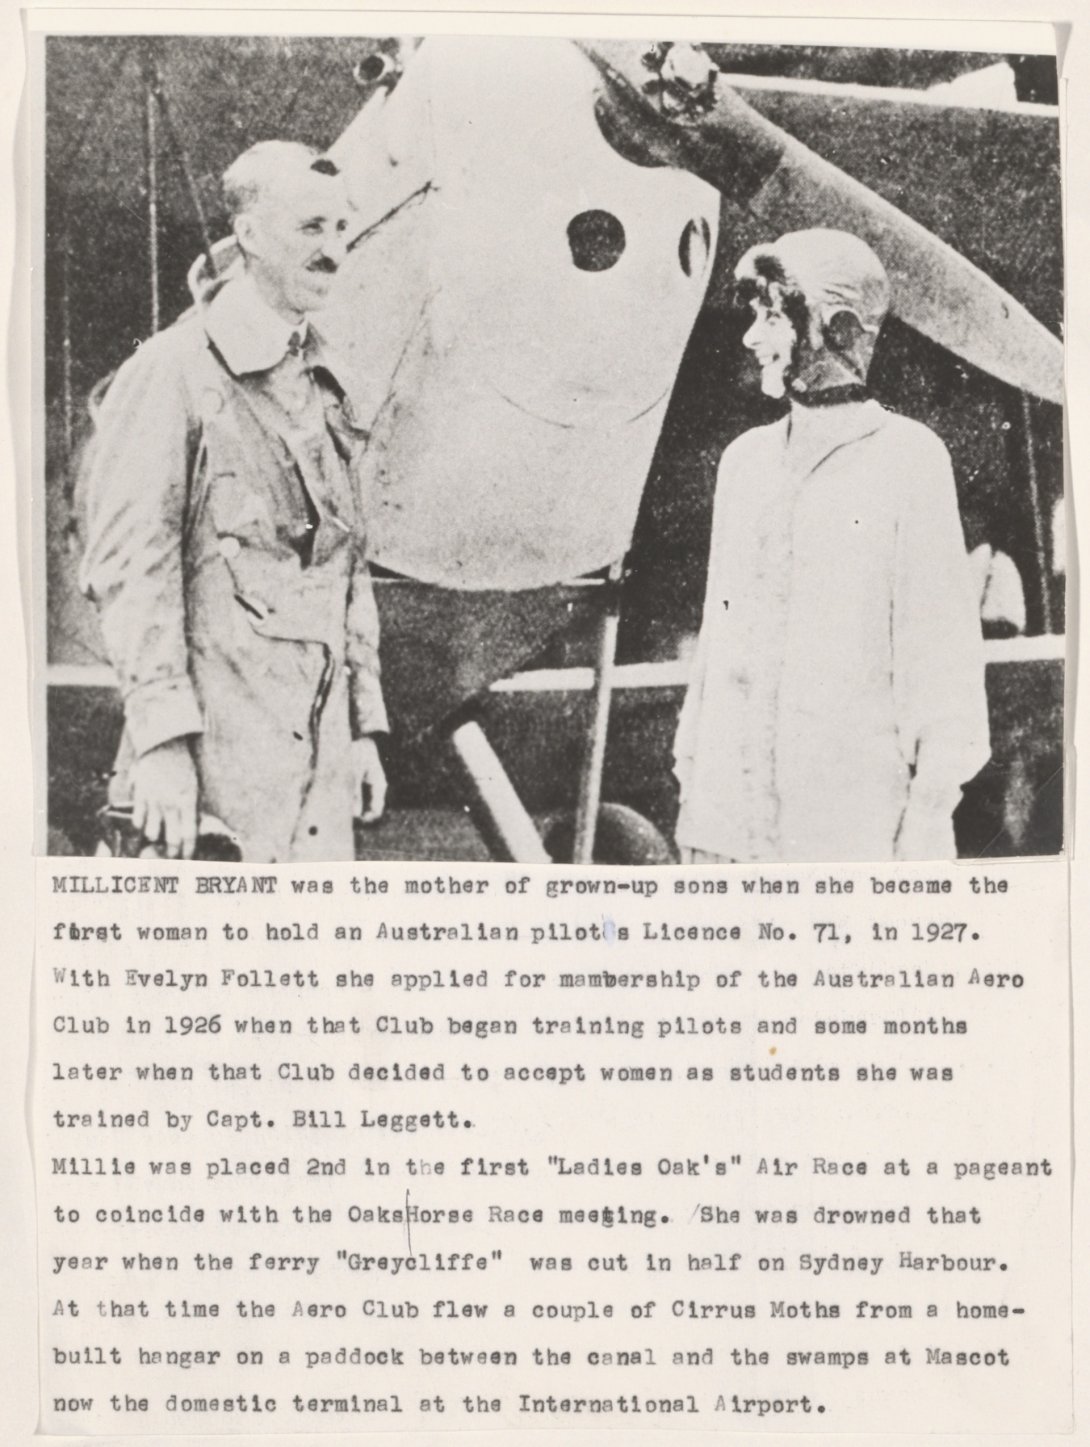 Black an white photo of a woman in a pilot cap standing at the front of a plane with a man with a moustache. Below the image are two paragraphs of text about the woman's career as a pilot.